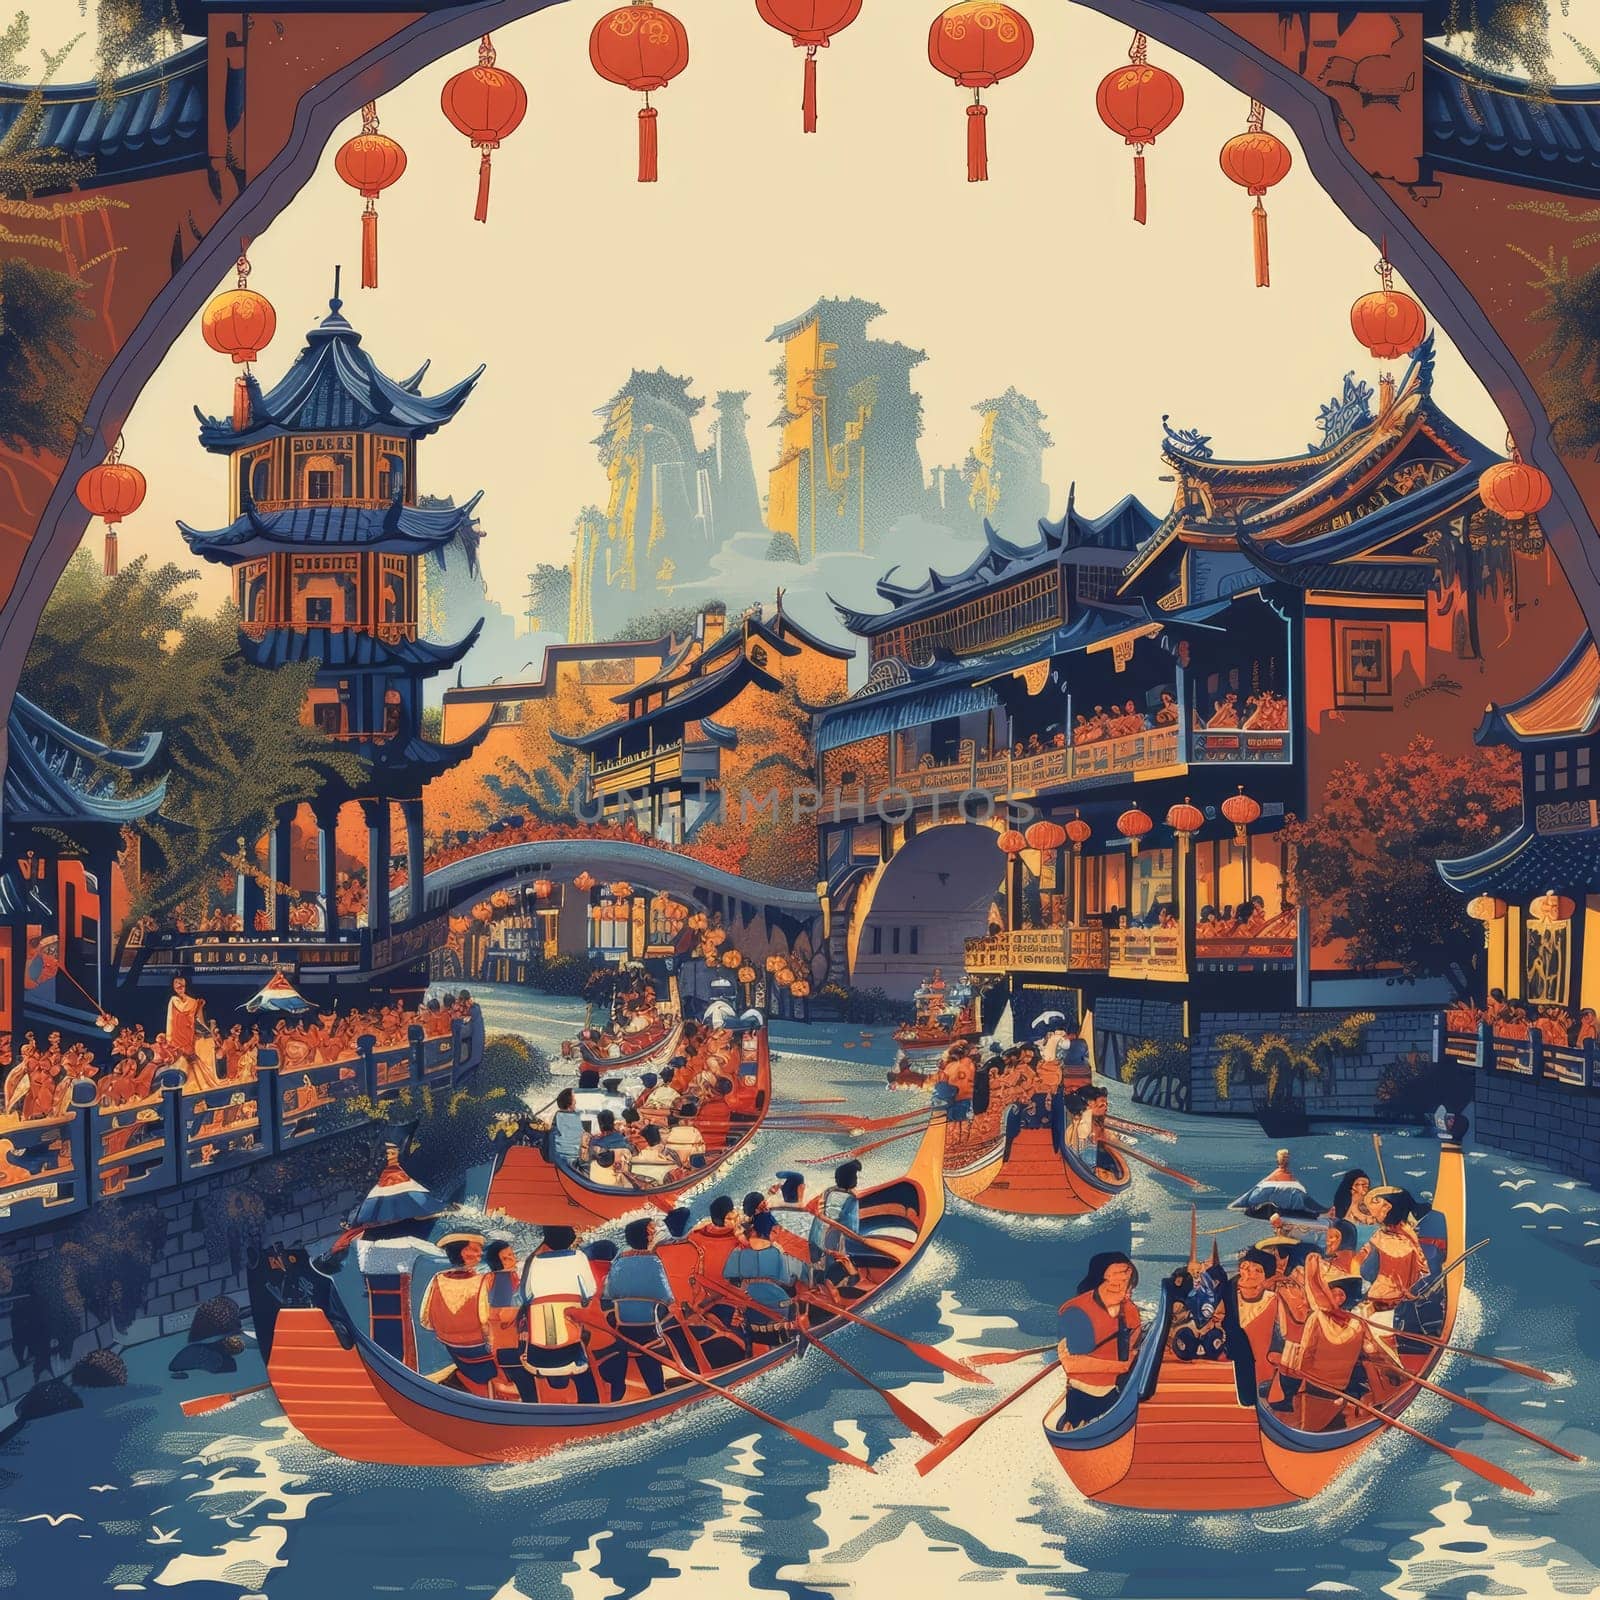 This vibrant image captures a twilight Dragon Boat Festival, with traditional architecture and boats under a serene, lantern-lit sky. by sfinks